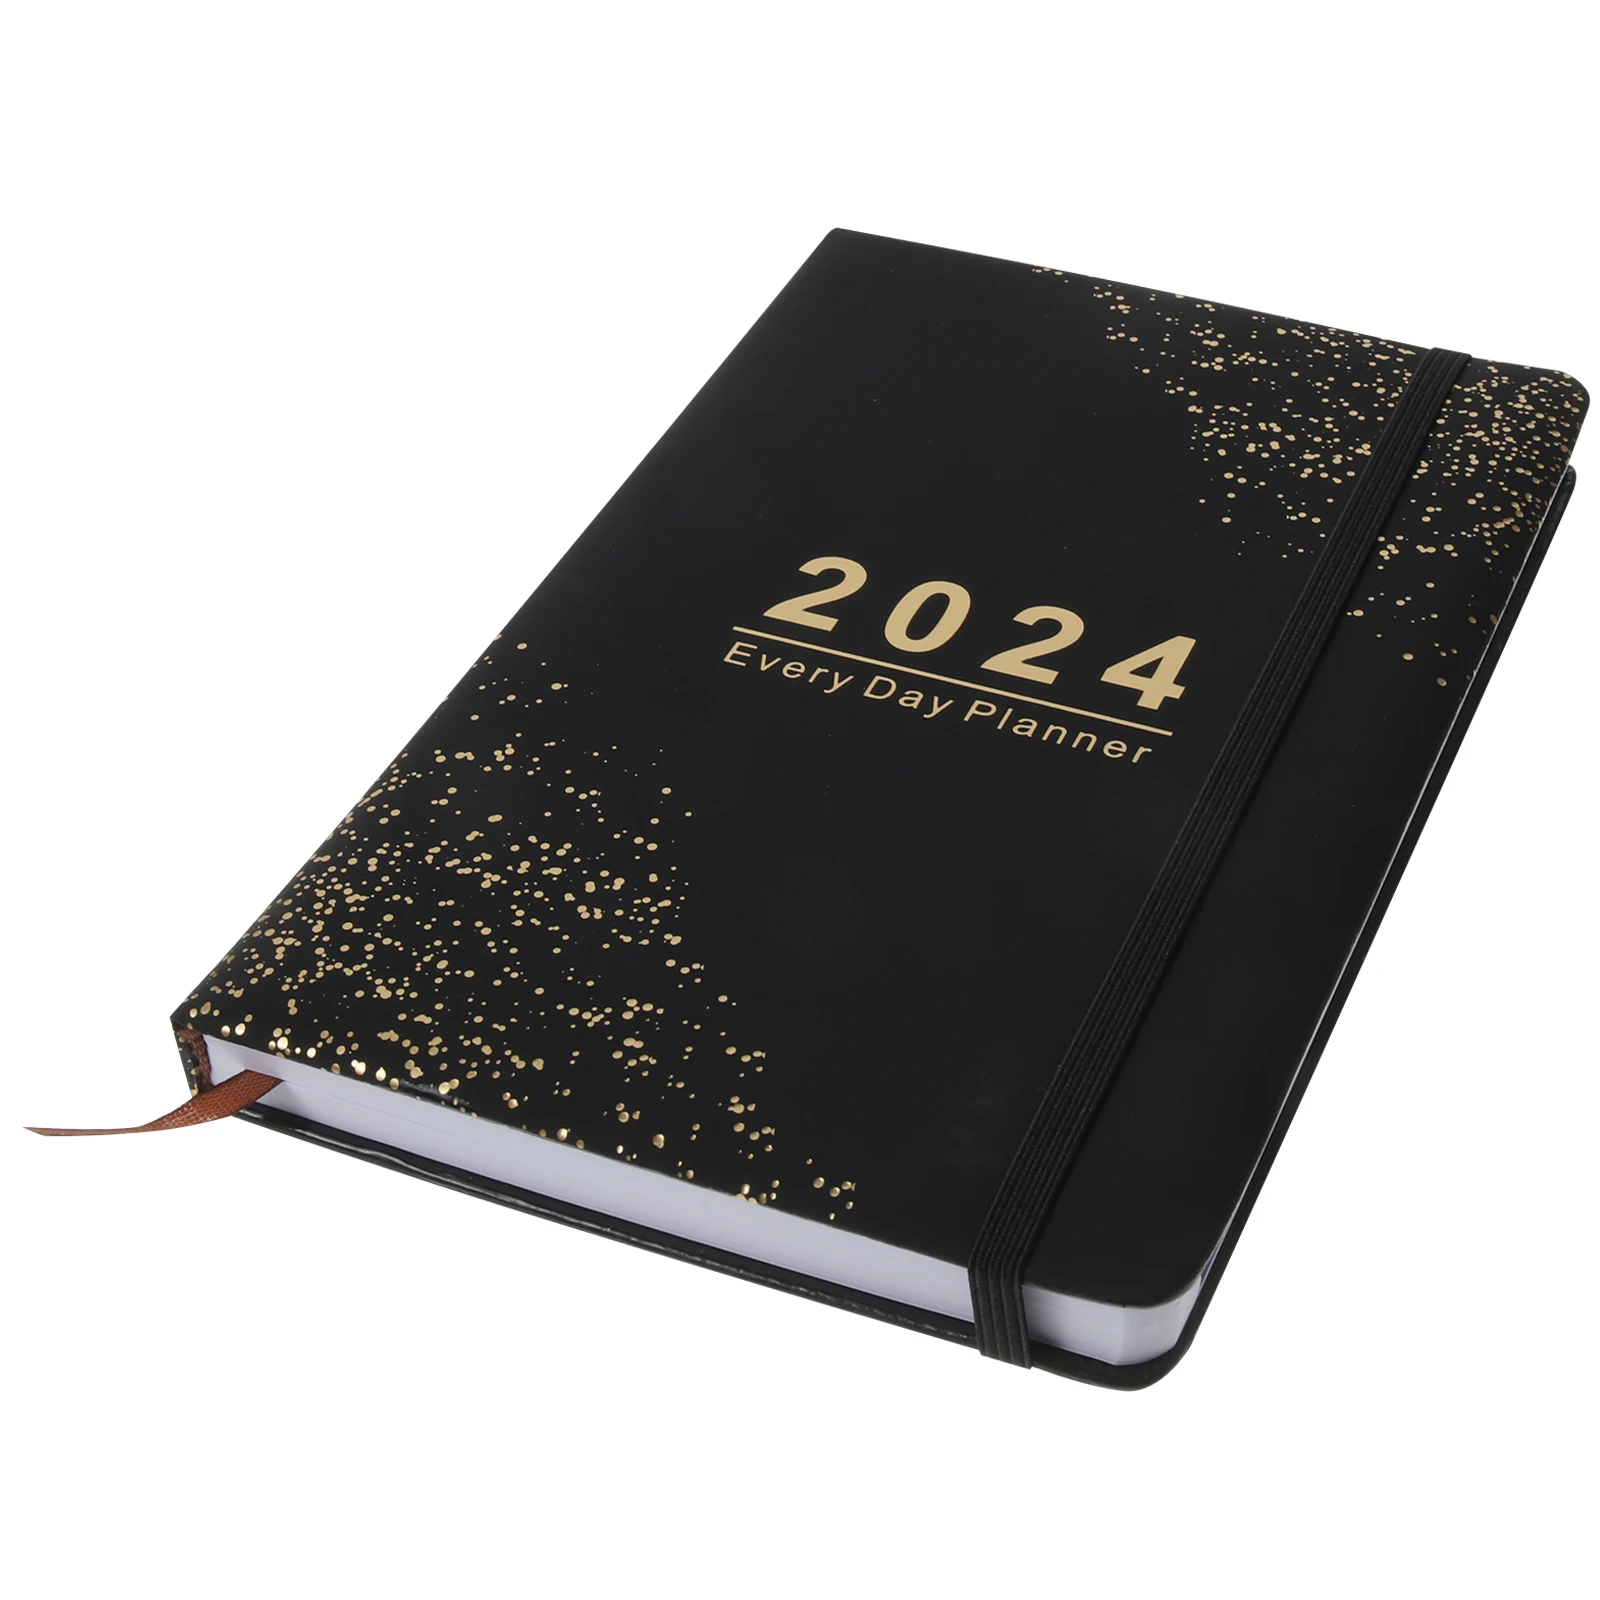 2024 Schedule Daily Schedule English Notebook Schedule Leather Cover Daily Schedule Schedule This Log Table Monthly Planner 2022 time management schedule book notepads creative planner reminder timetable desk dates schedule diary notebook supplies